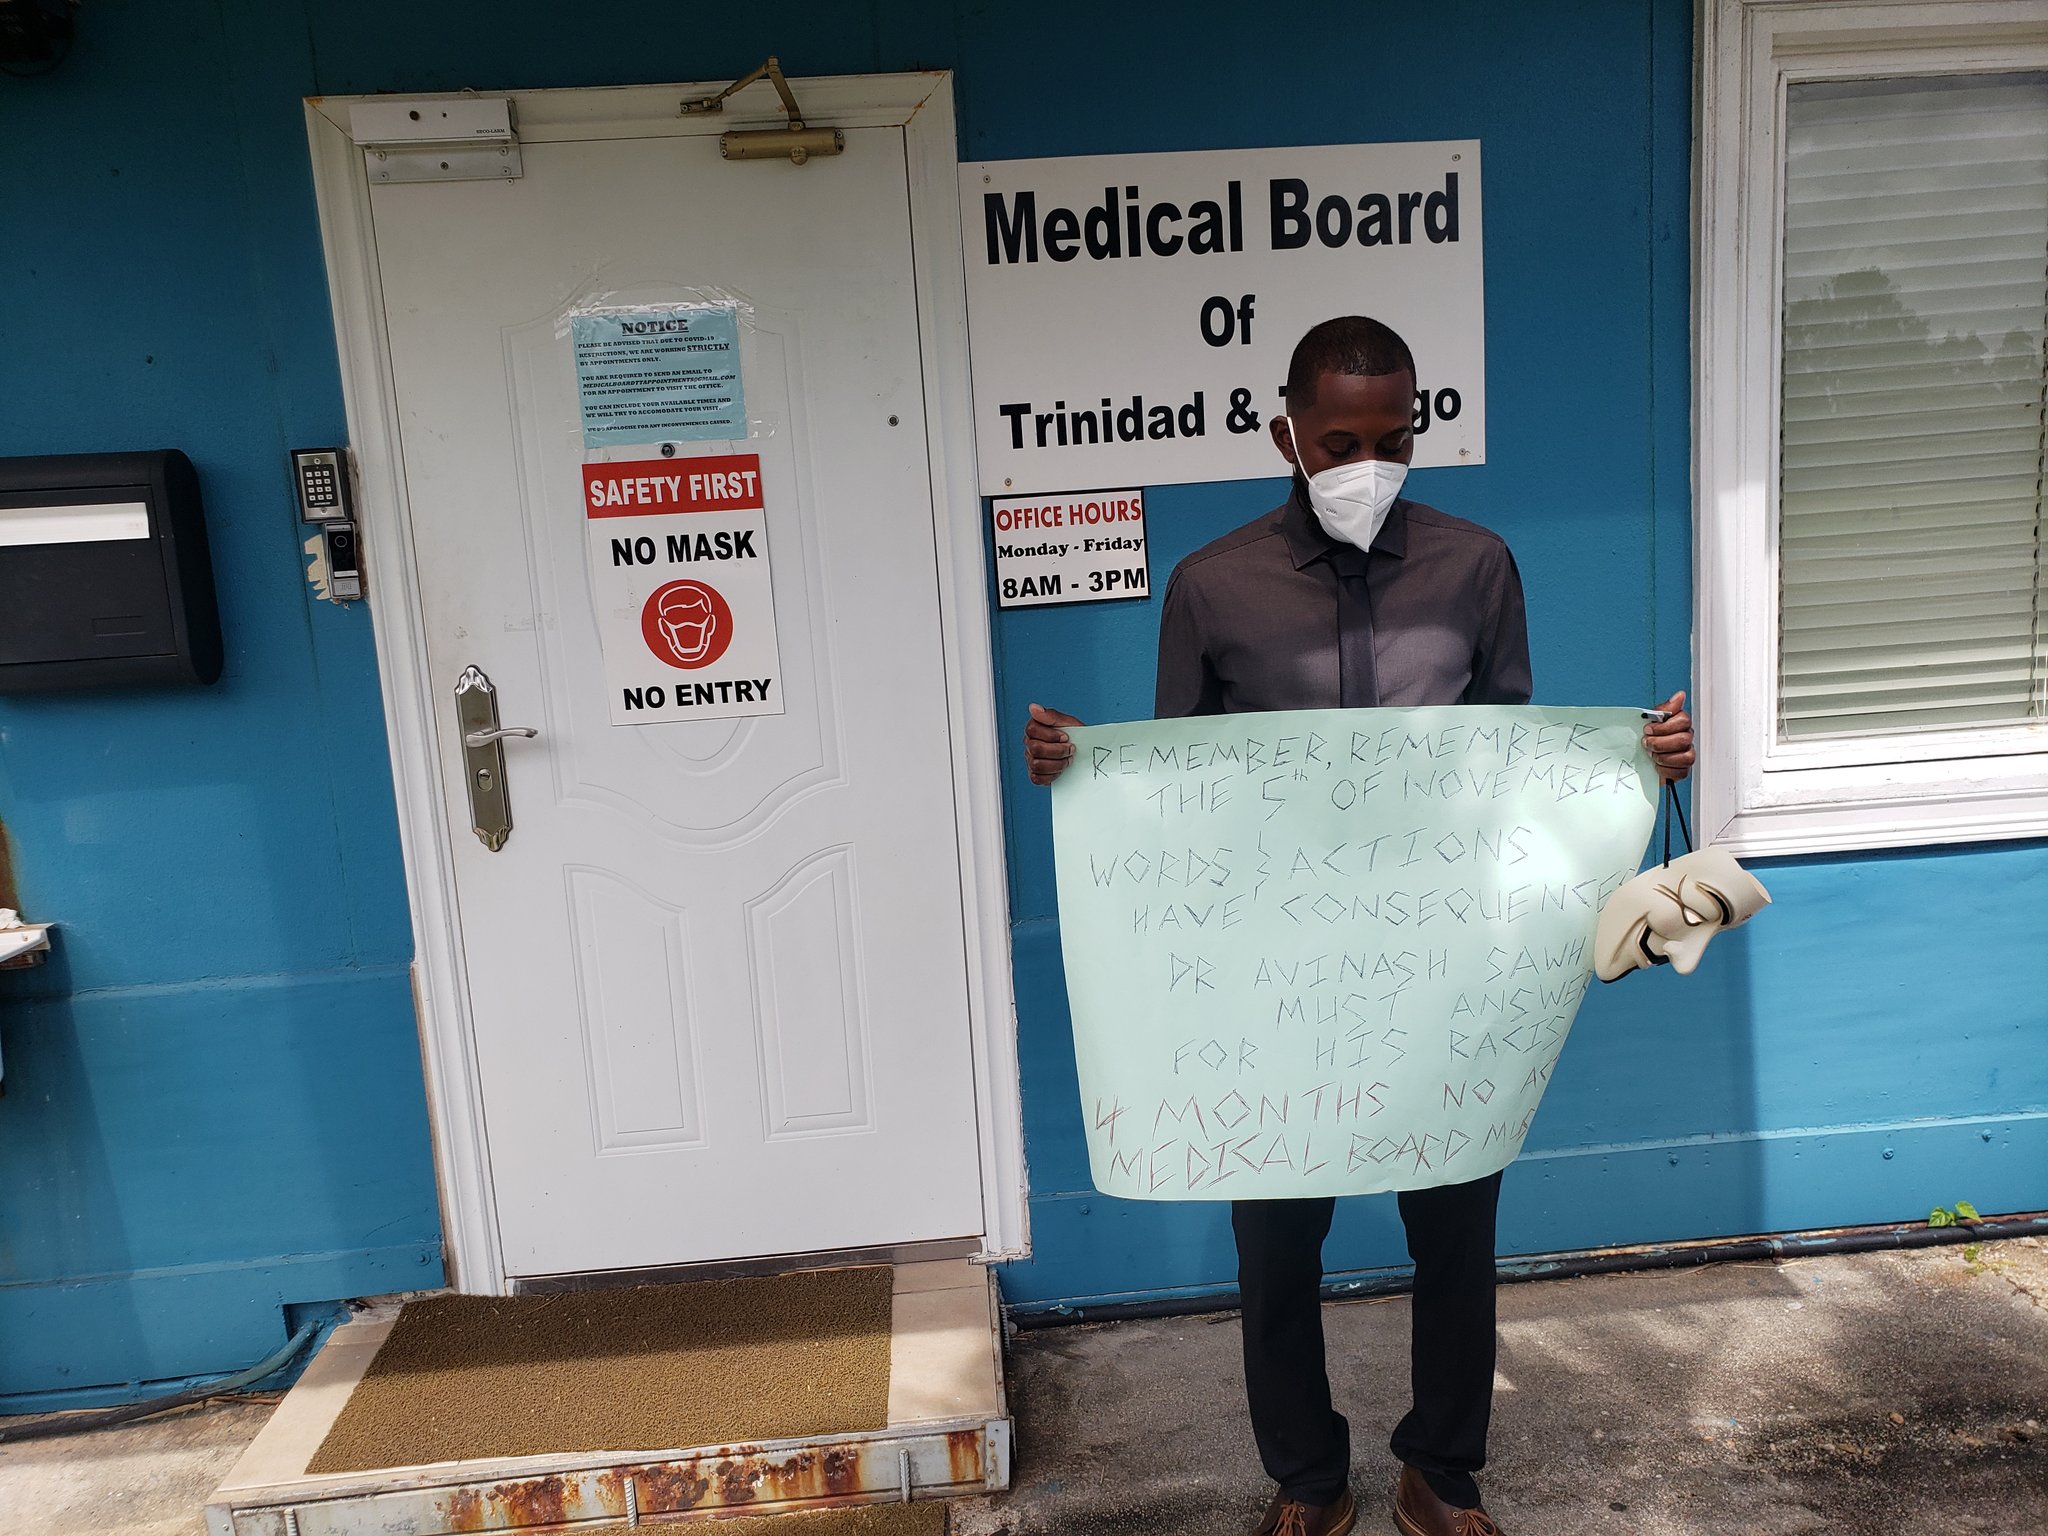 Doctor stages one man protest against Dr. Avinash Sawh